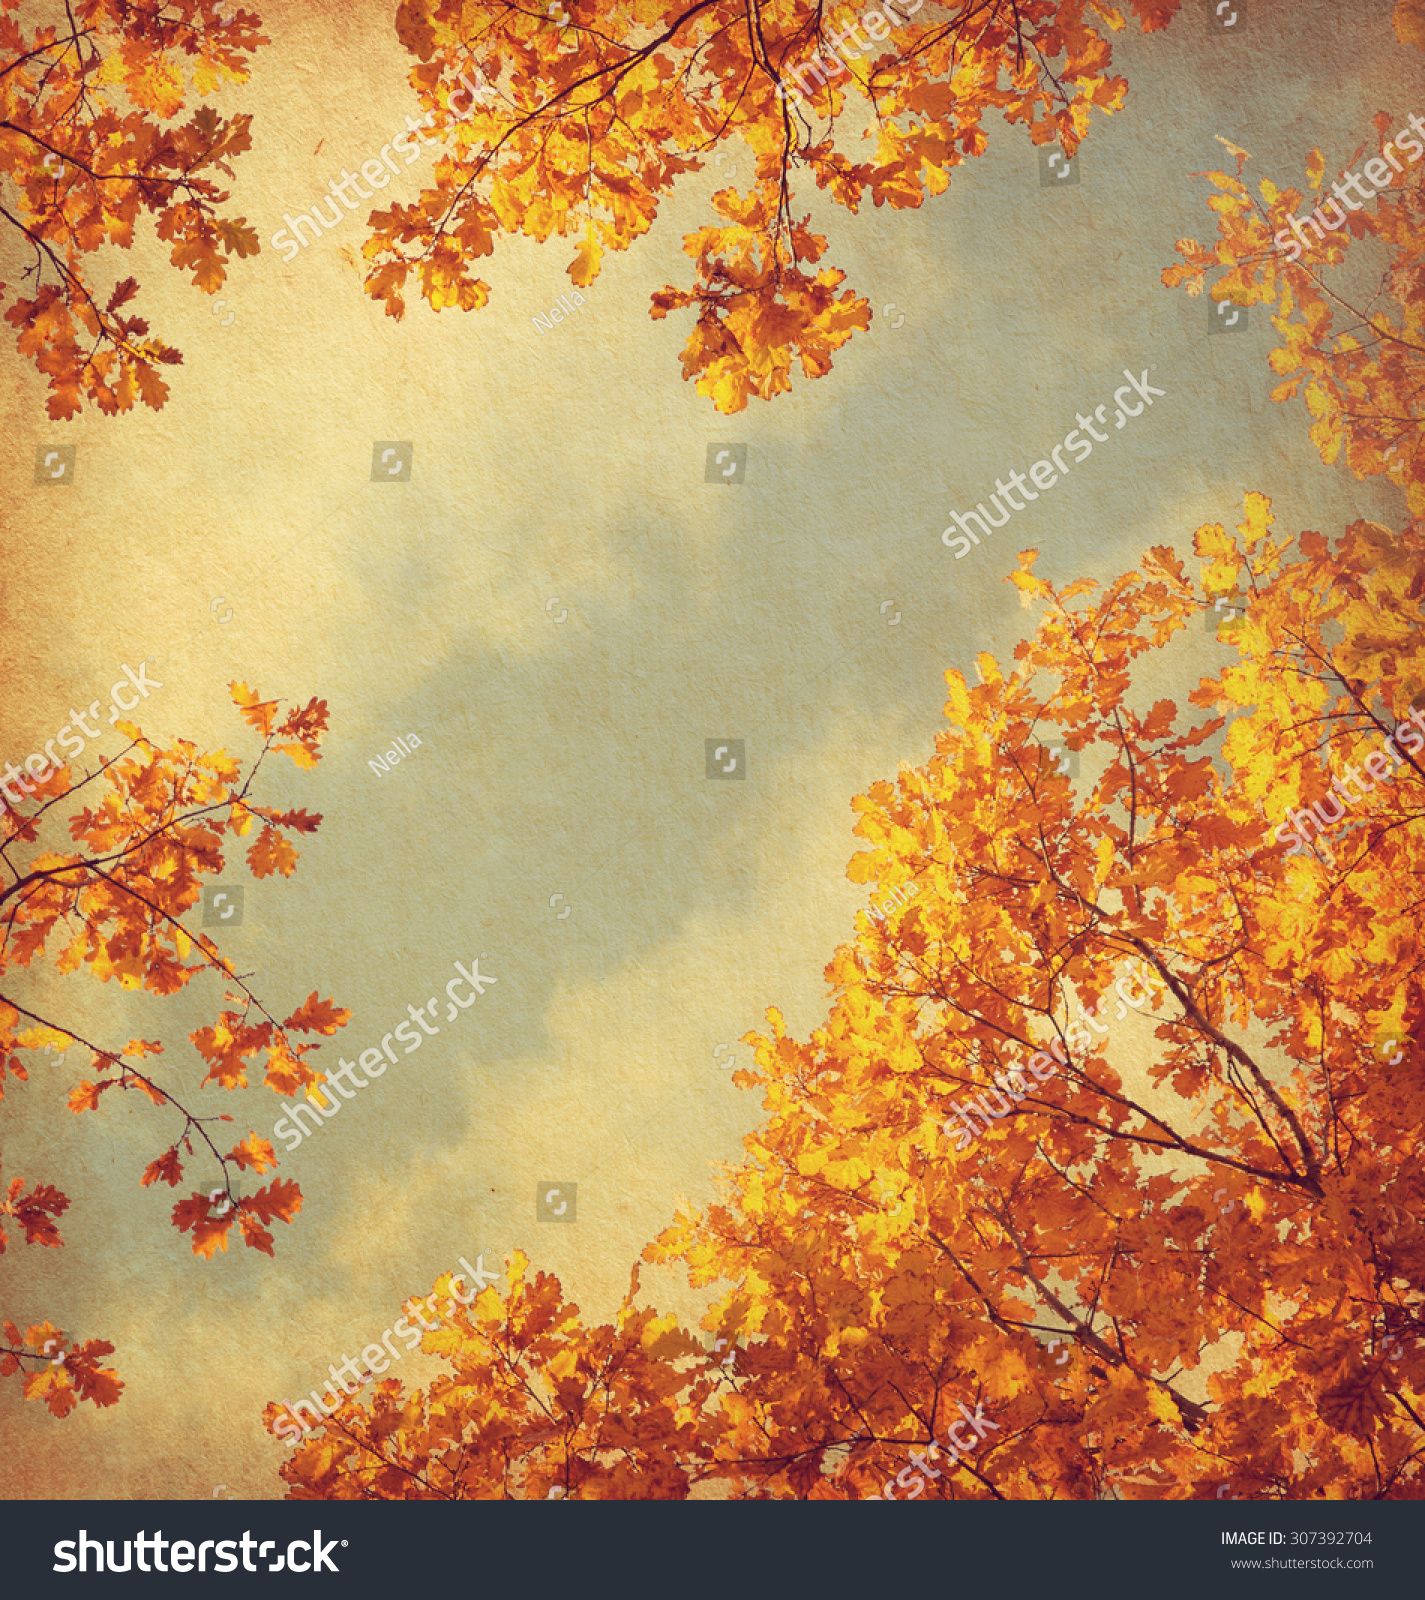 Retro image of Autumn leaves on the sky background. Added paper texture.  Toned image #307392704